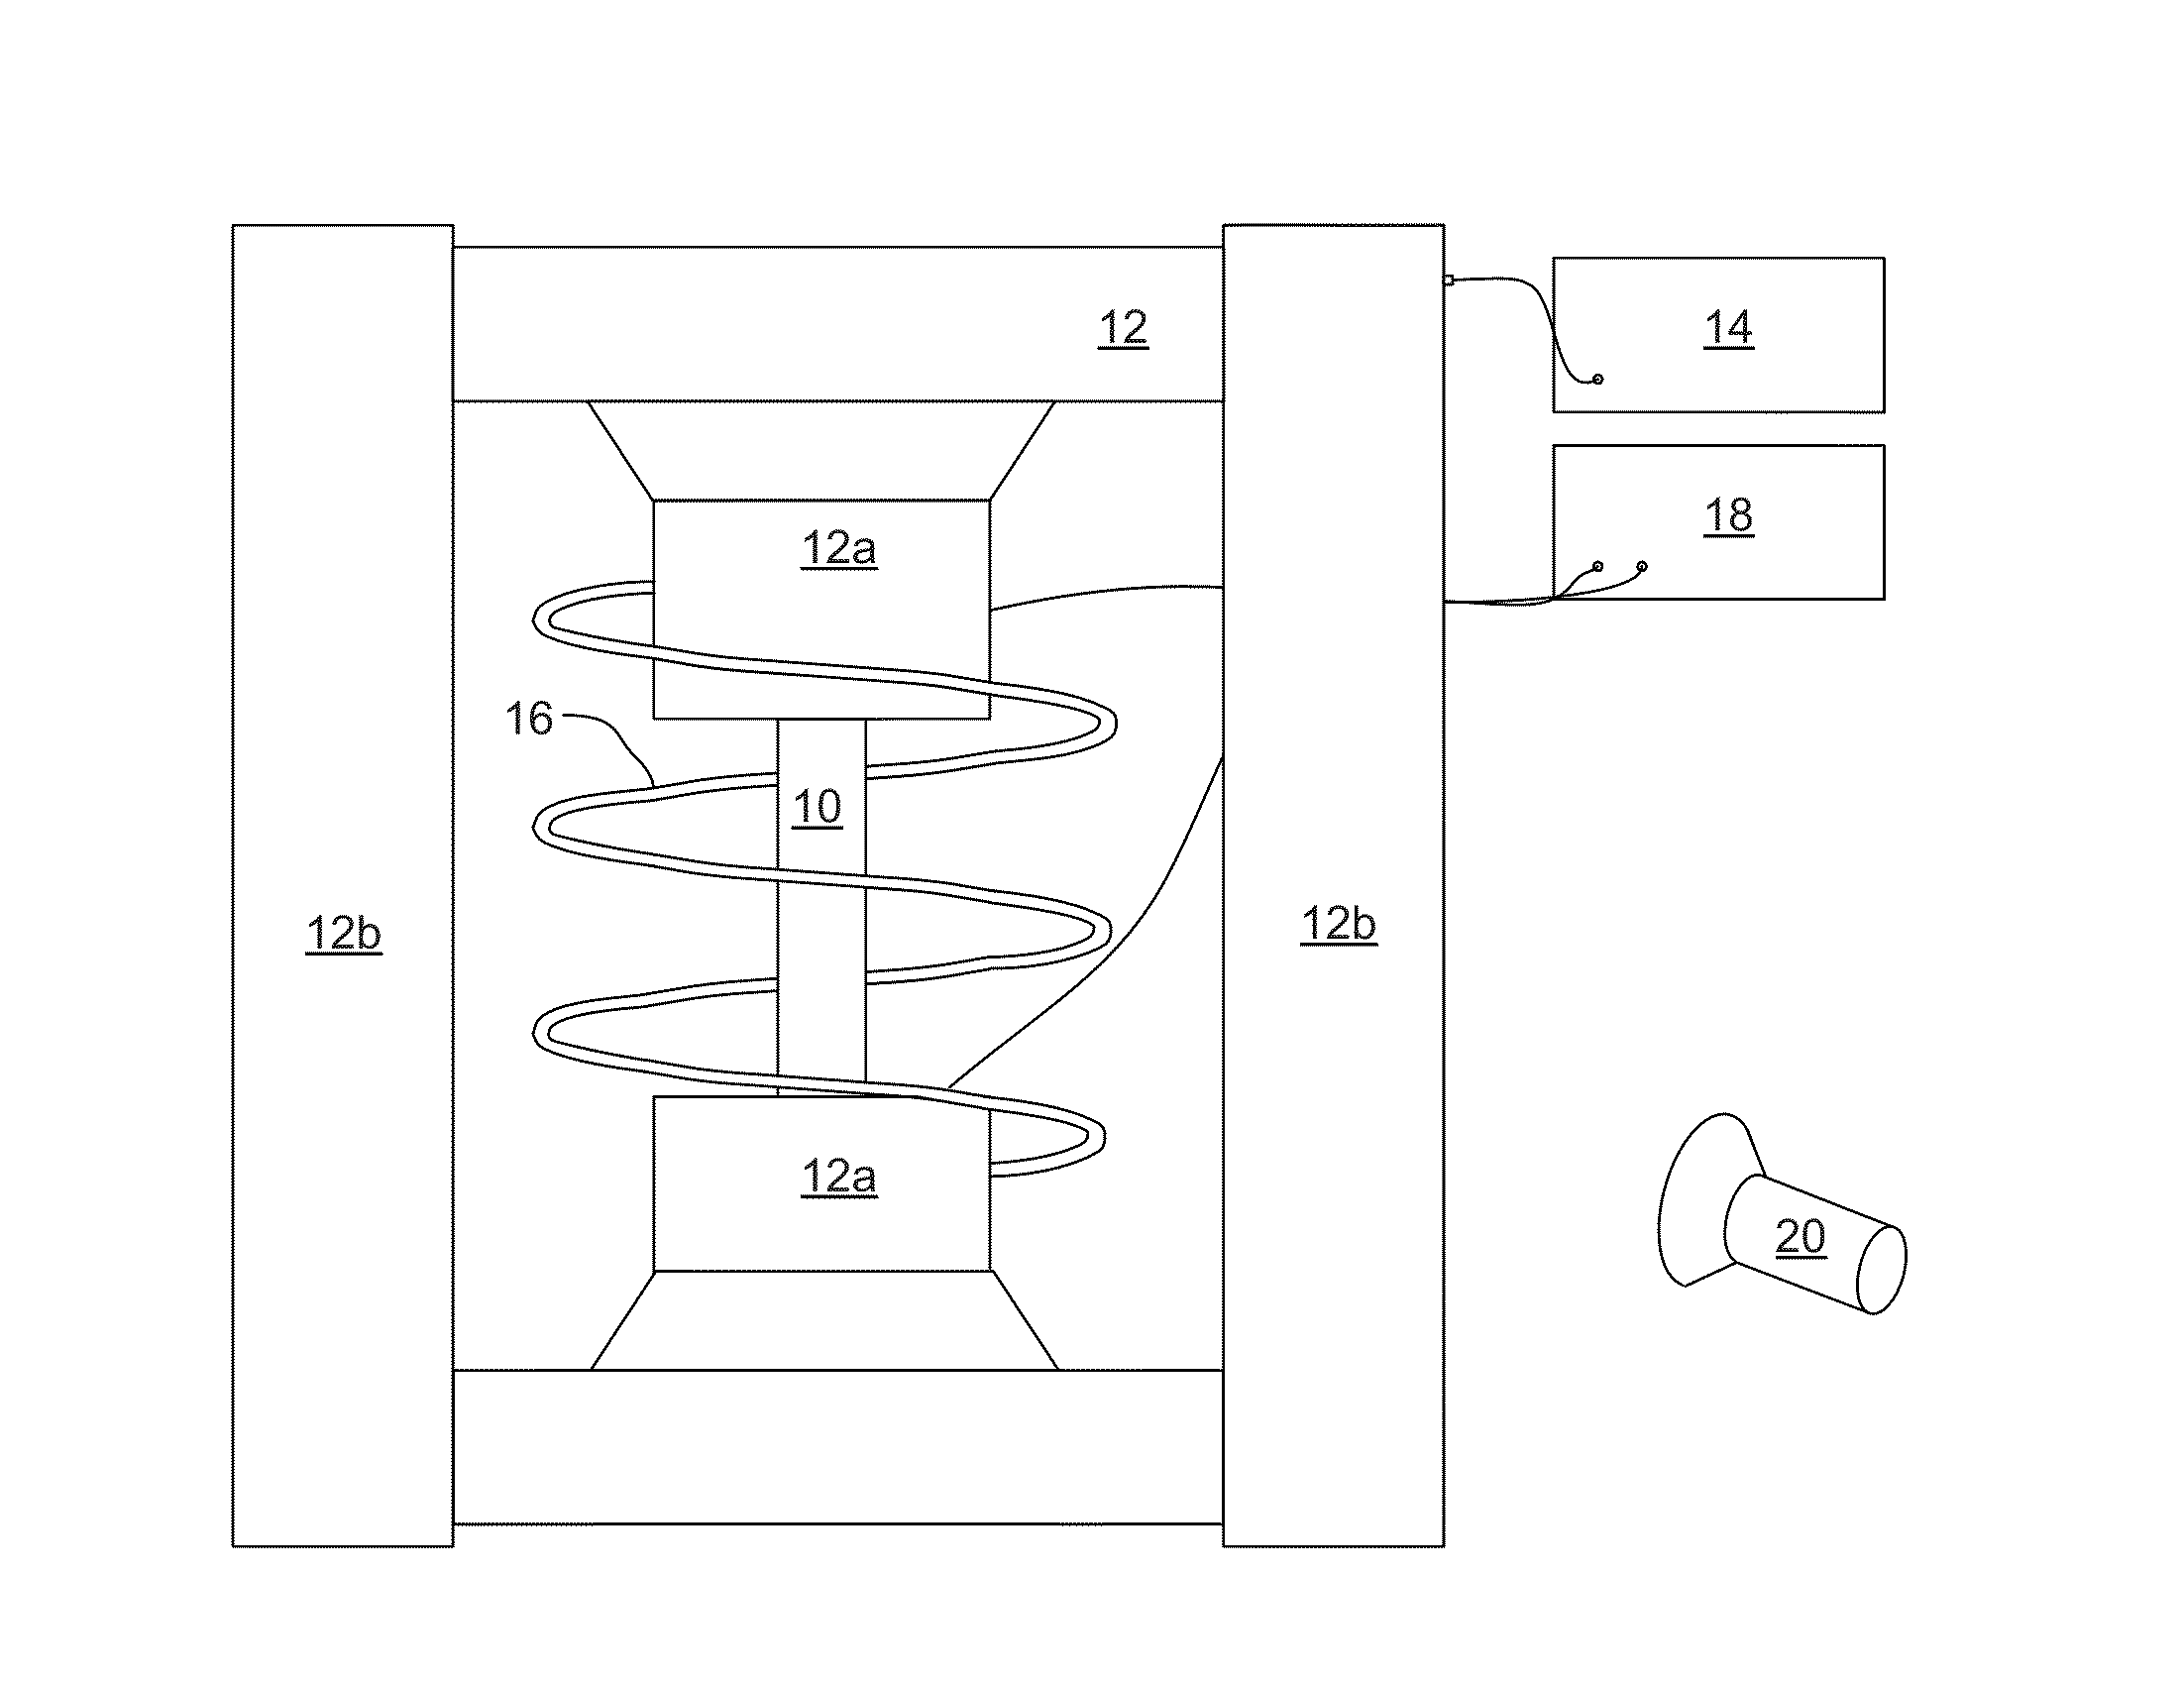 Apparatus for crack detection during heat and load testing